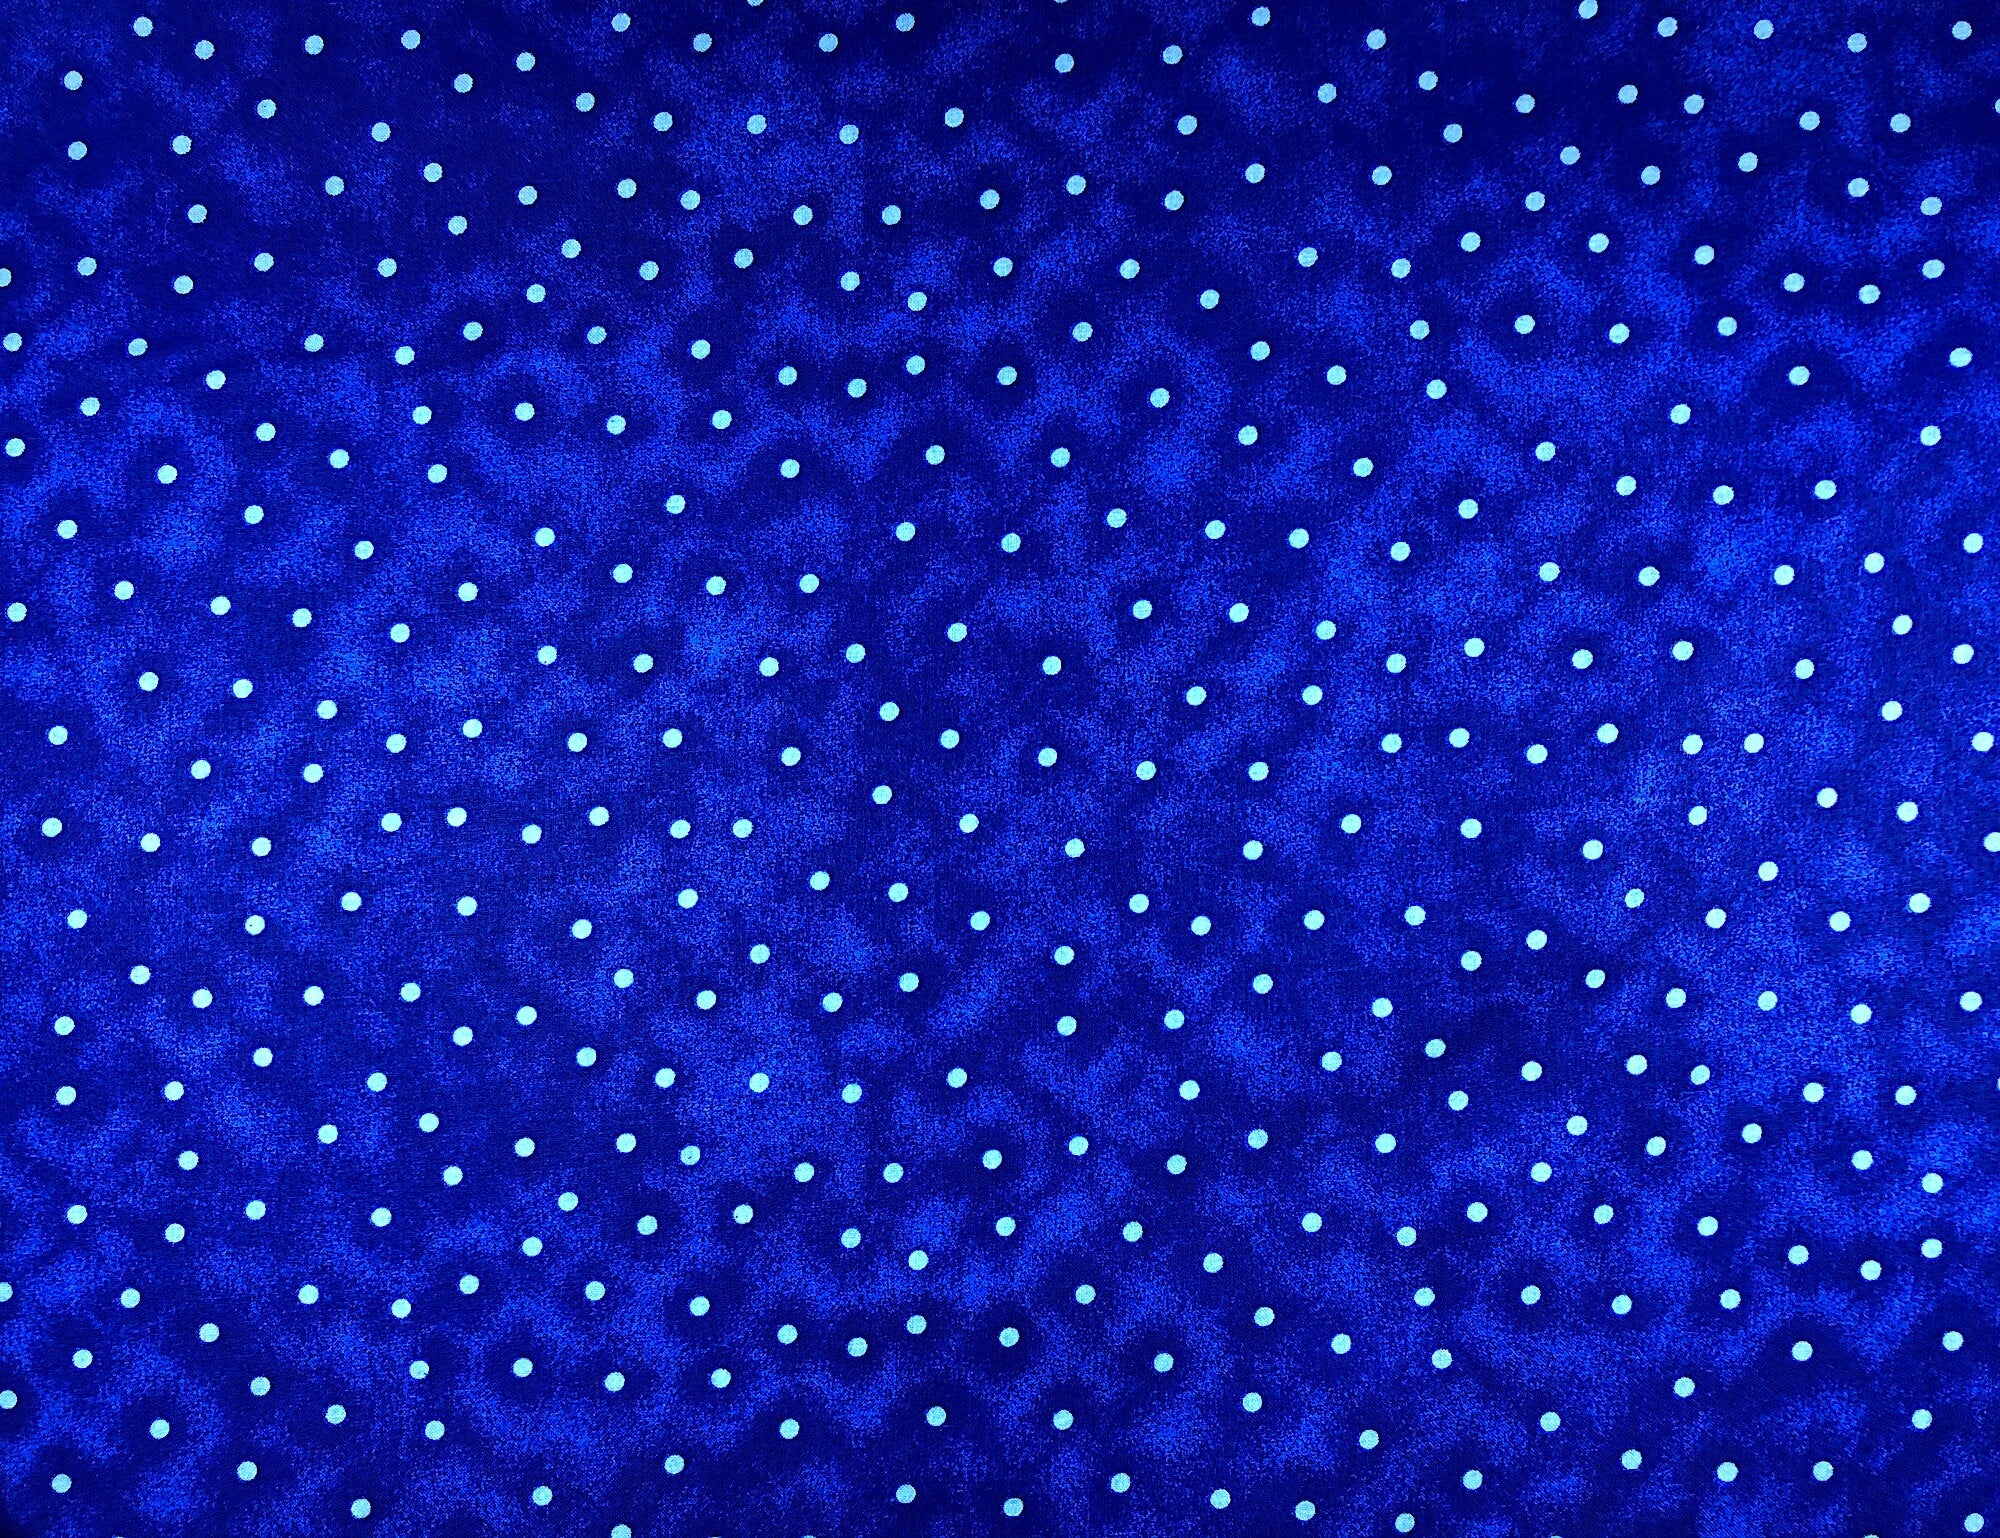 This wide blue fabric is covered with light blue dots. The blue backing is a mixture of several shades of blue.